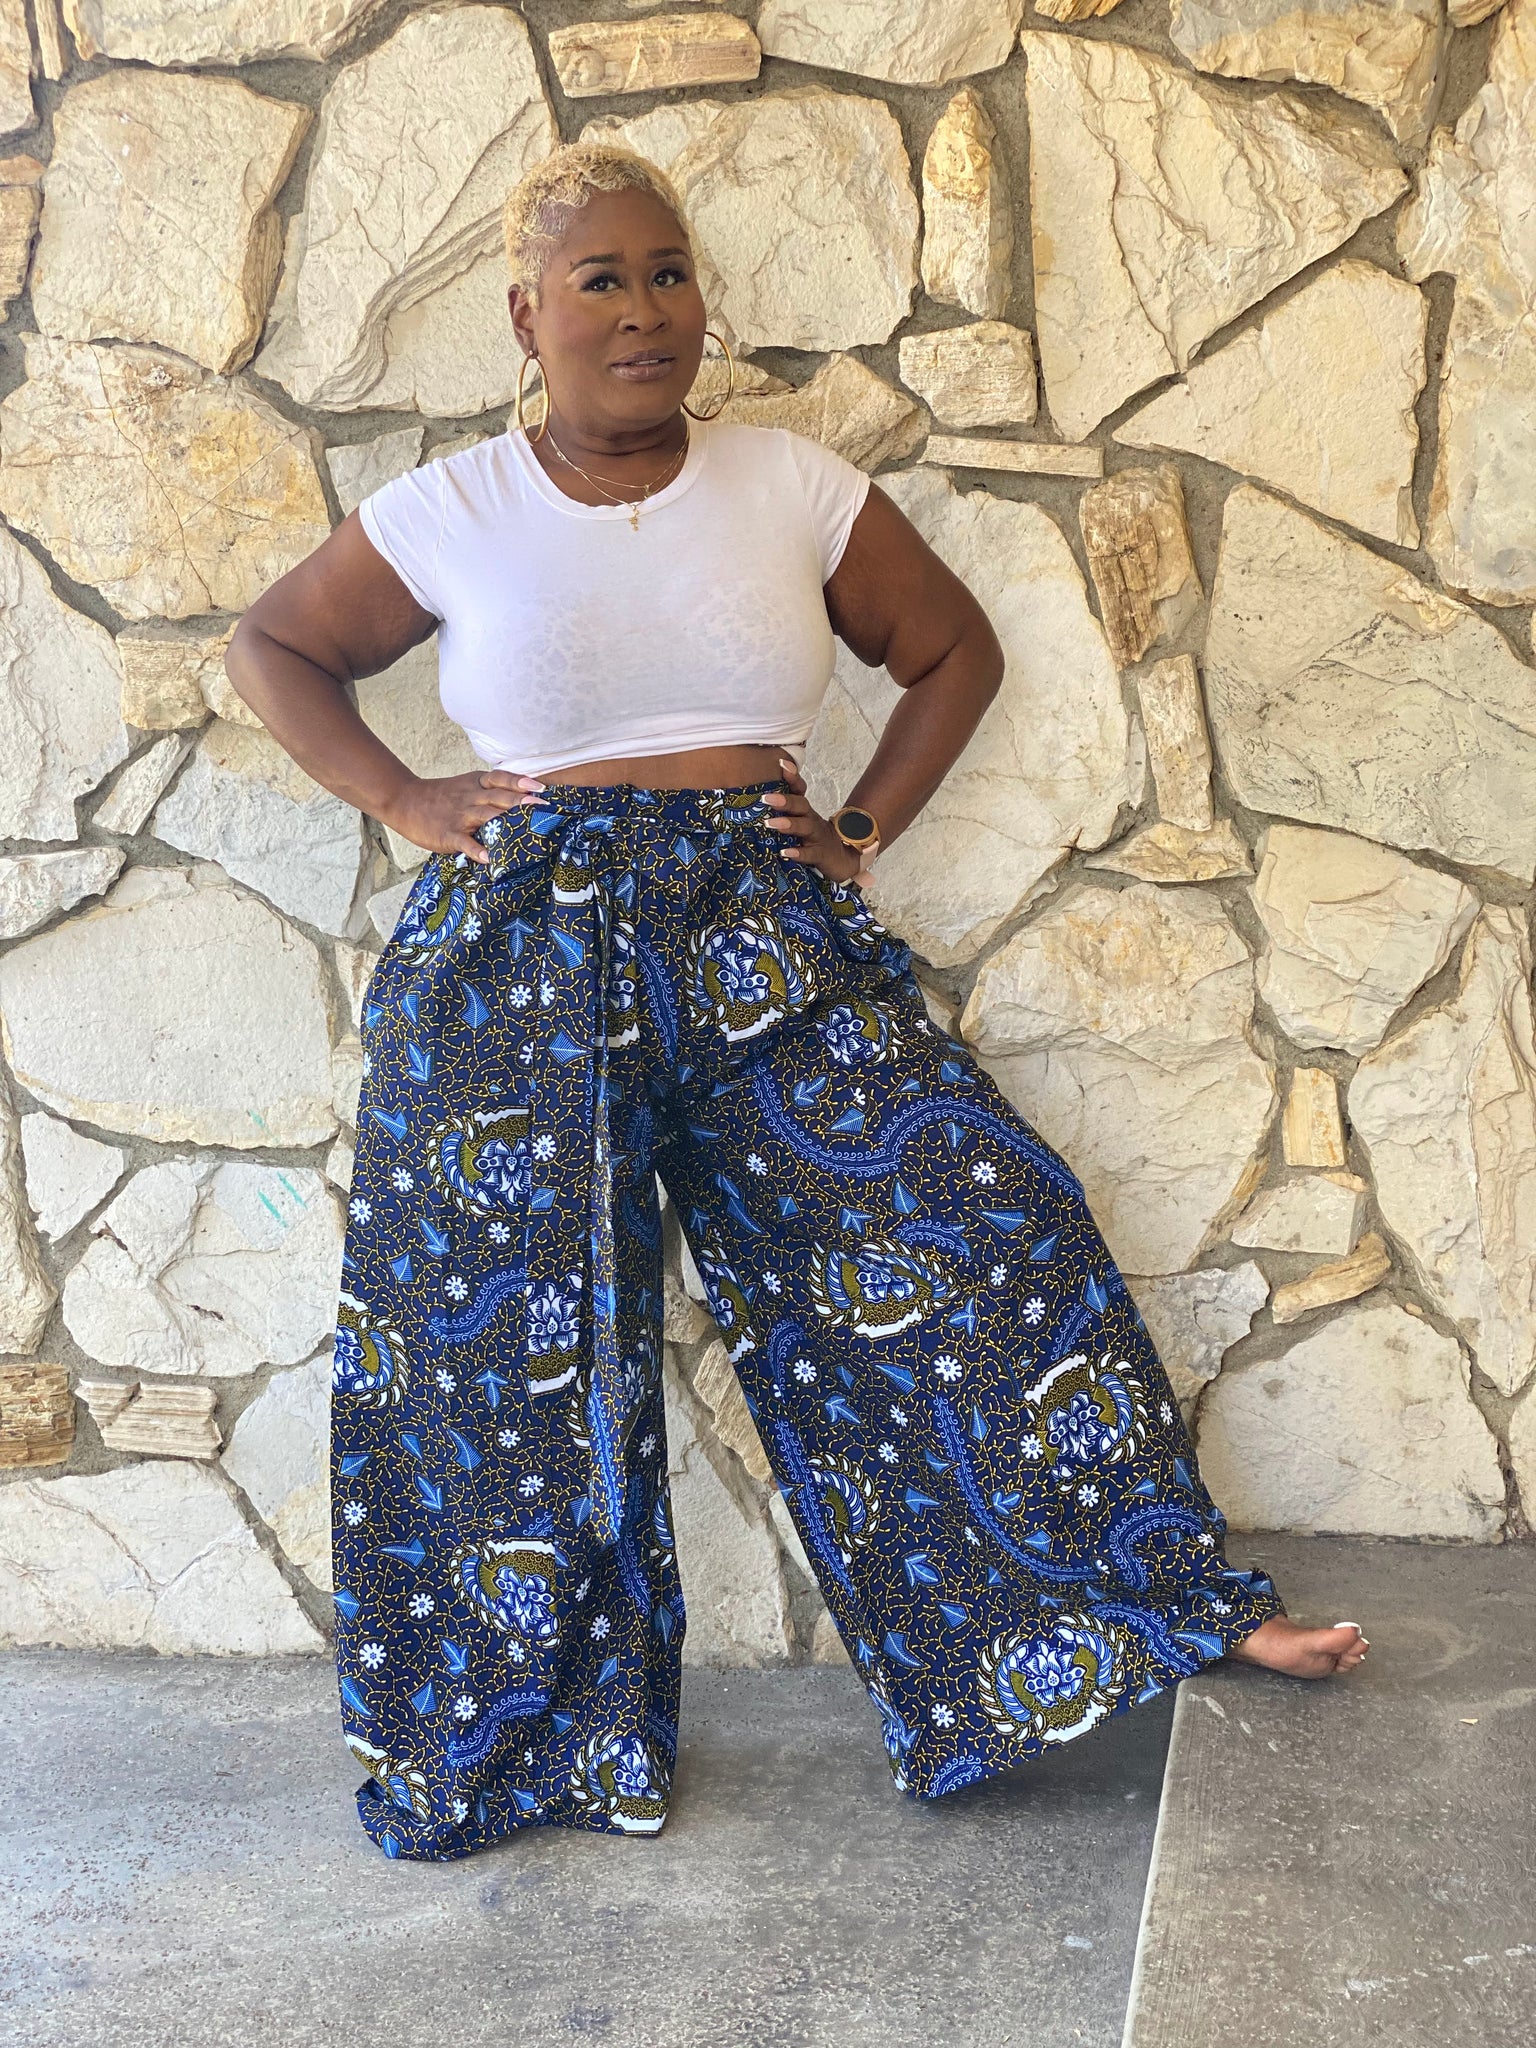 23 Best Palazzo Pants for Every Summer Occasion | Vogue